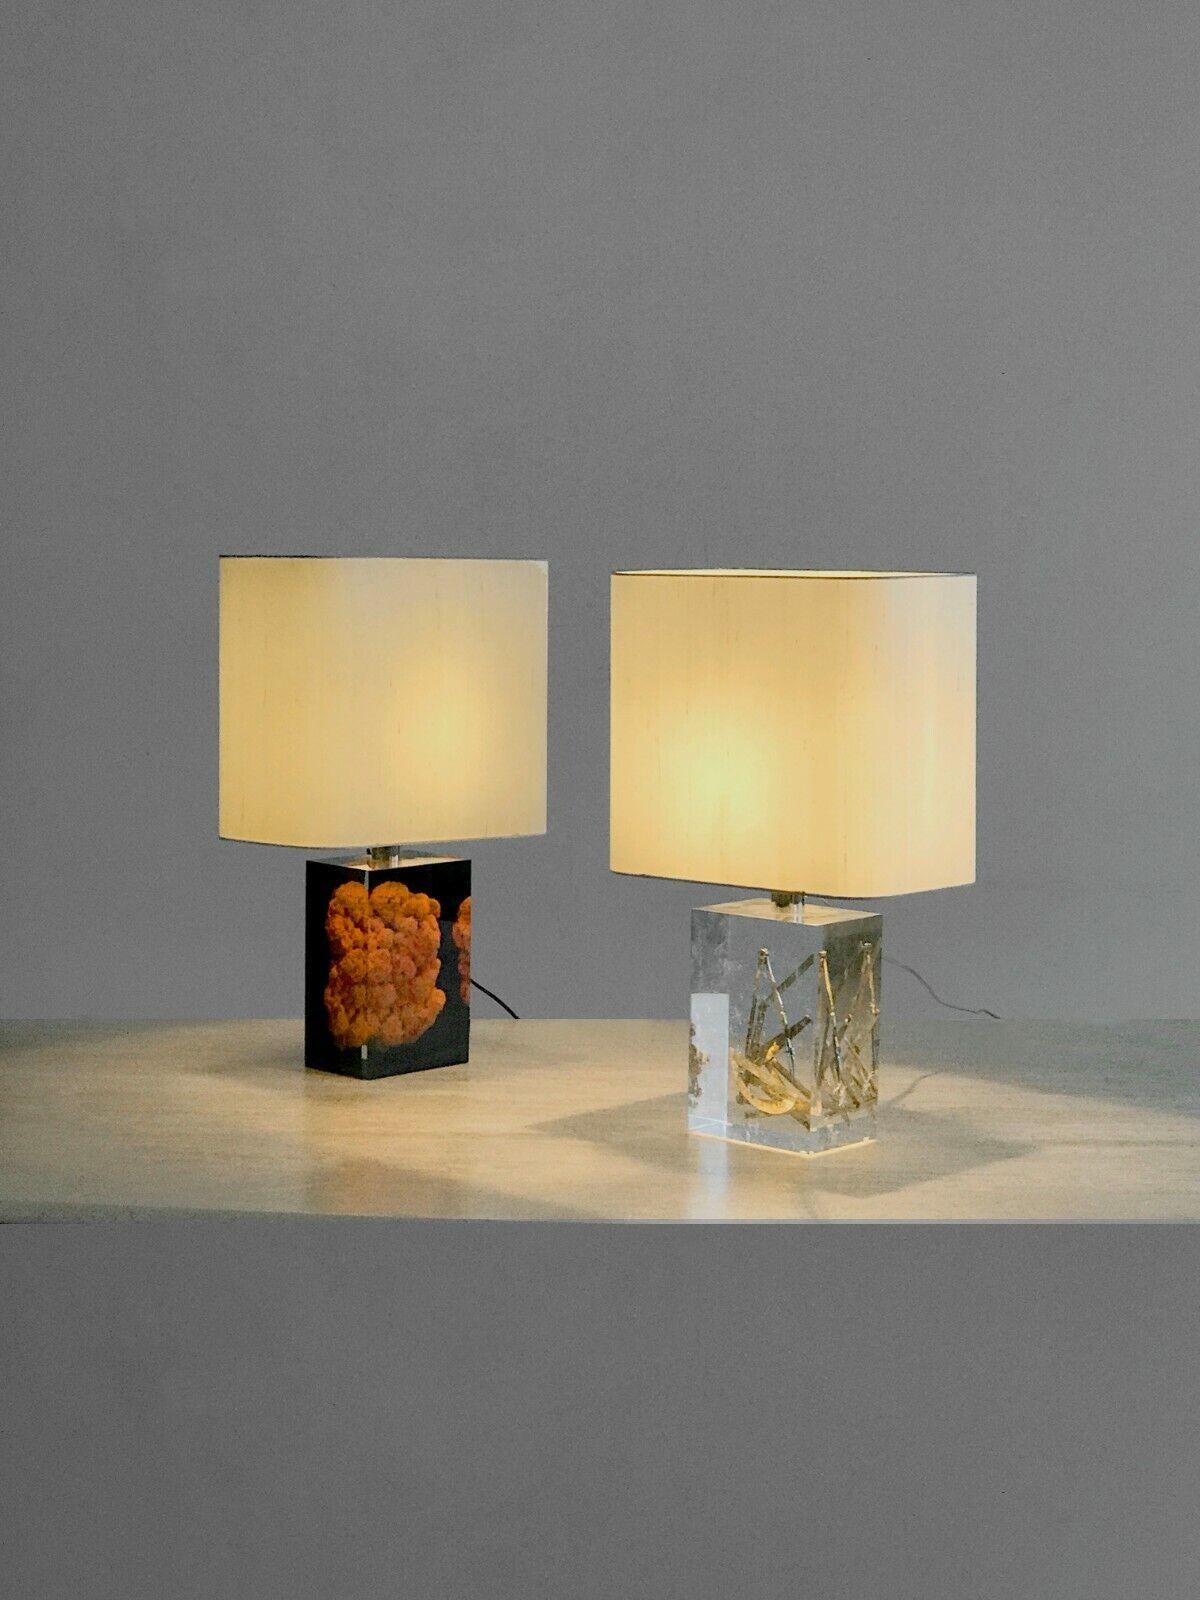 A Pair of POP SHABBY-CHIC Lucite TABLE LAMPS by PIERRE GIRAUDON, France, 1970 For Sale 2